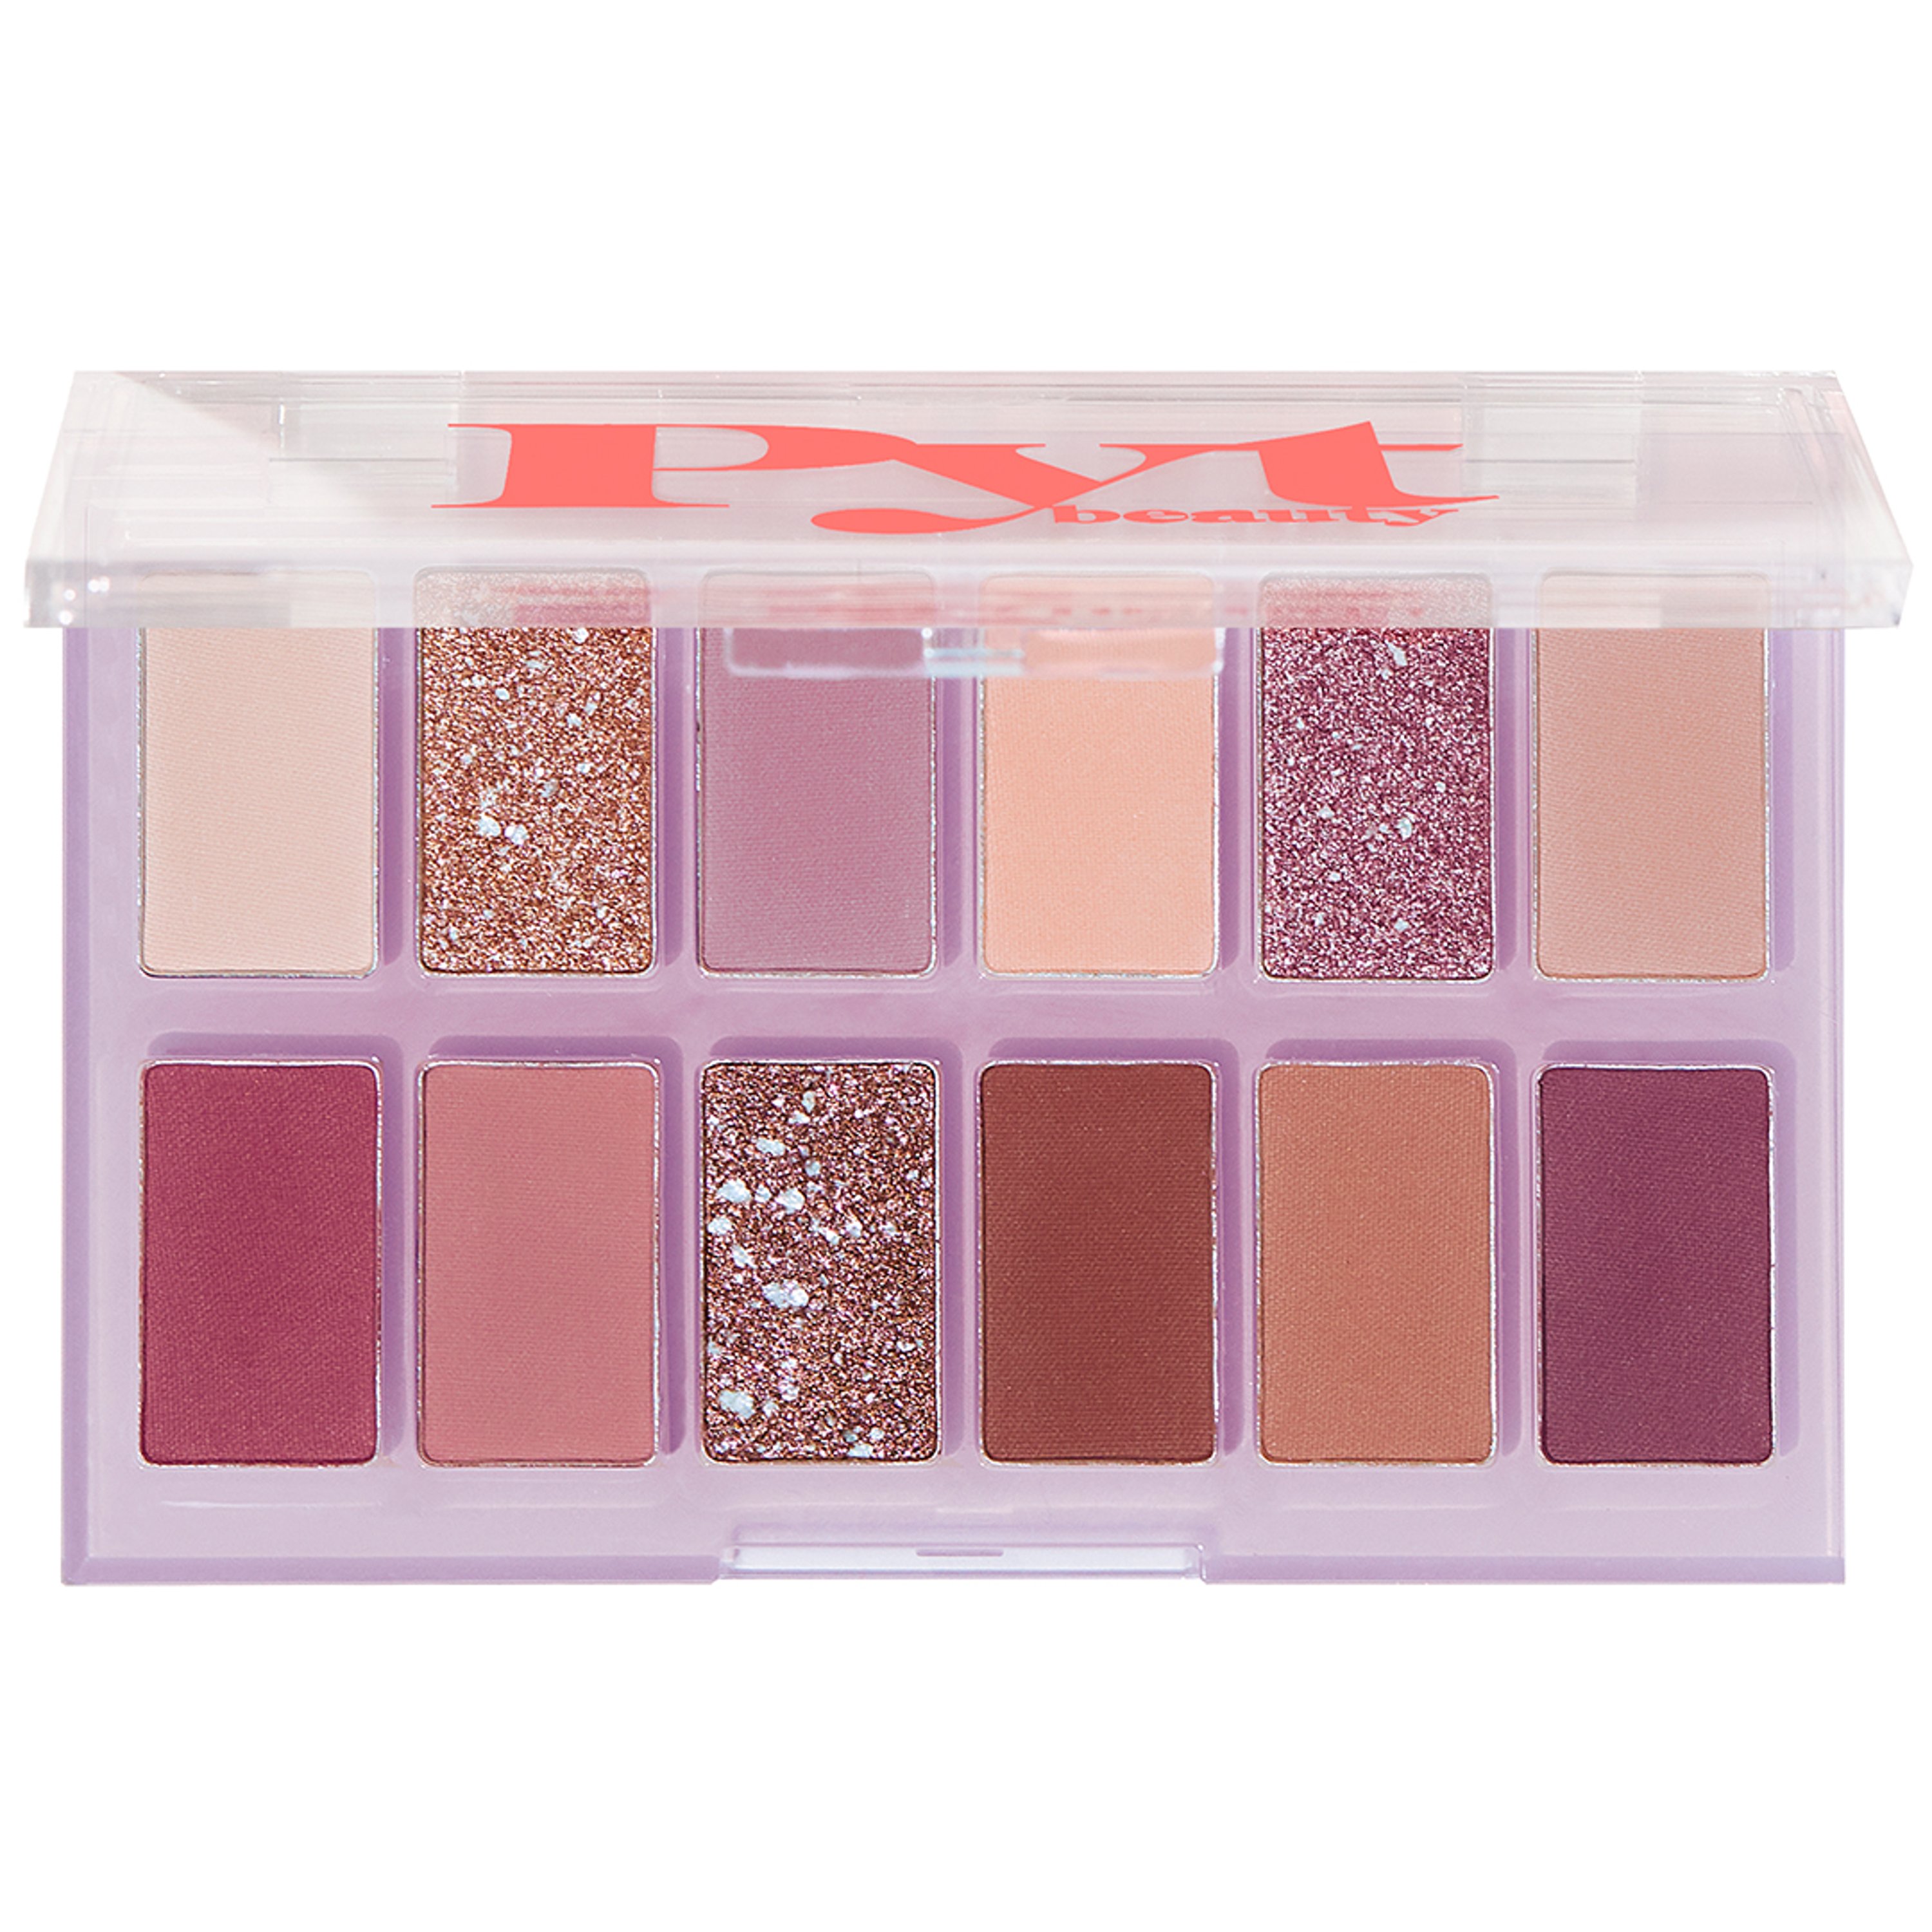 PYT BEAUTY PYT BEAUTY THE UPCYCLE EYESHADOW PALETTE / ROWDY ROSE NUDE